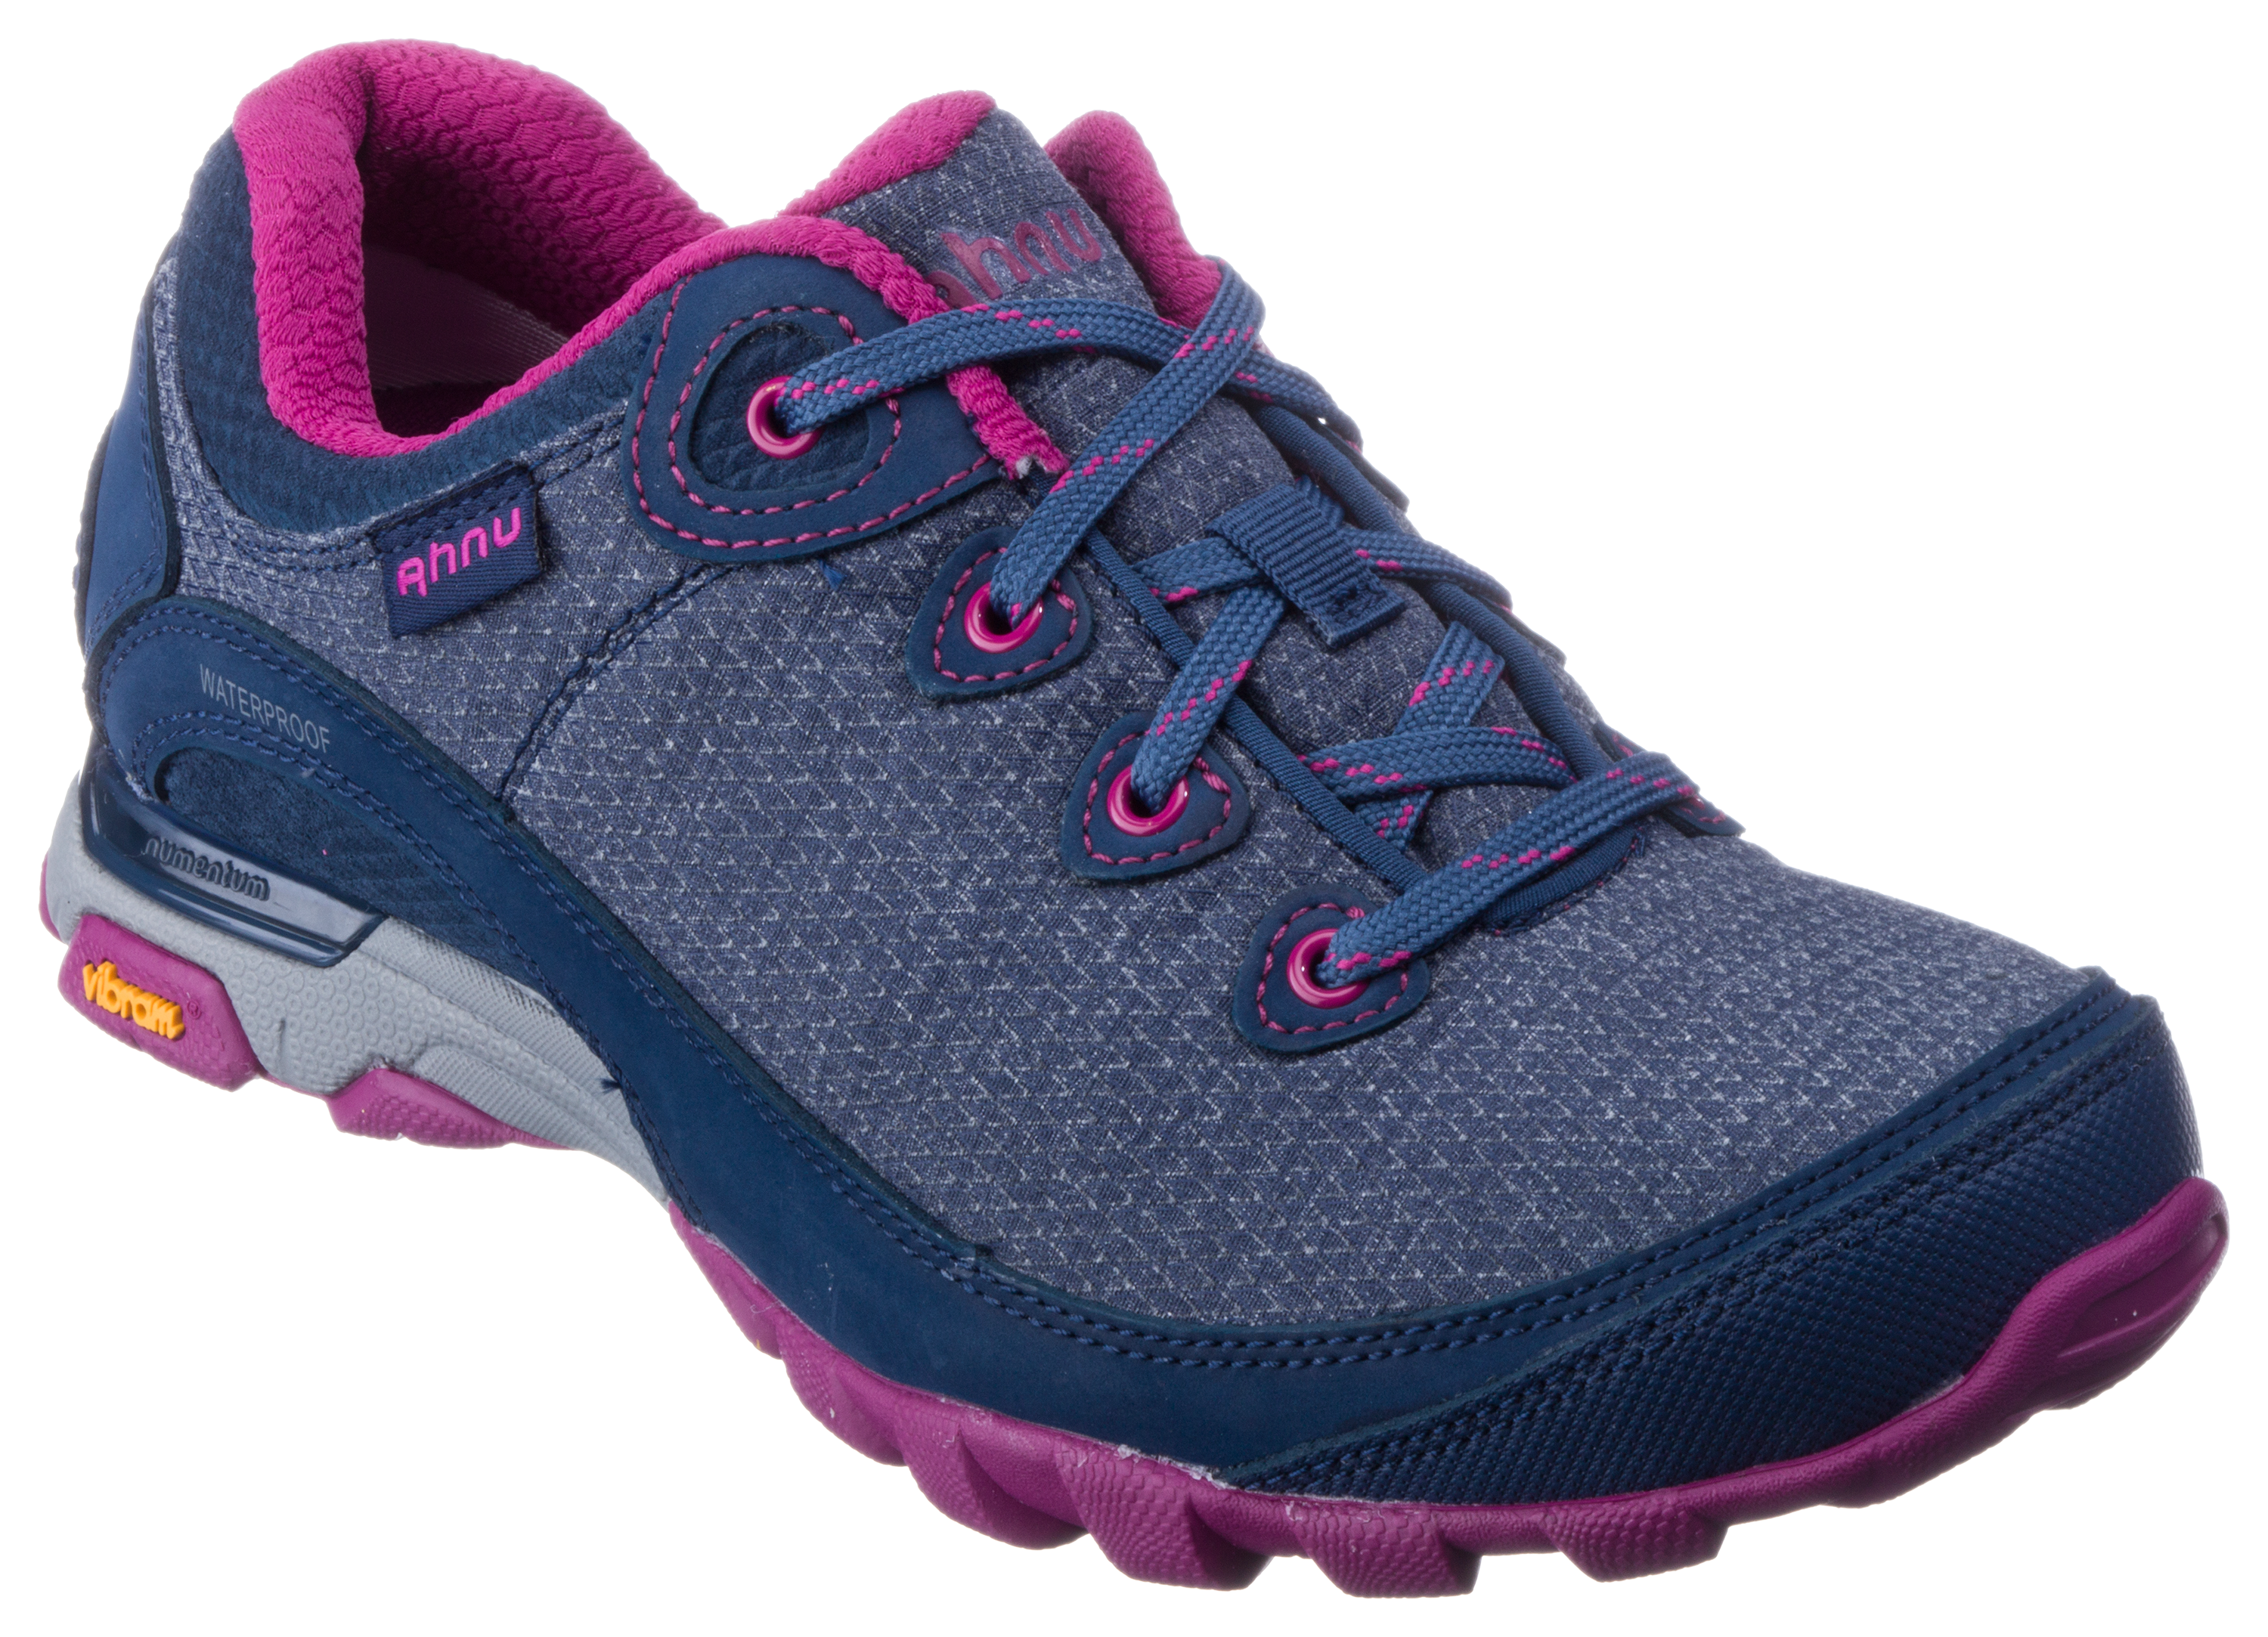 by Teva Sugarpine Hiking Shoes for Ladies Bass Pro Shops